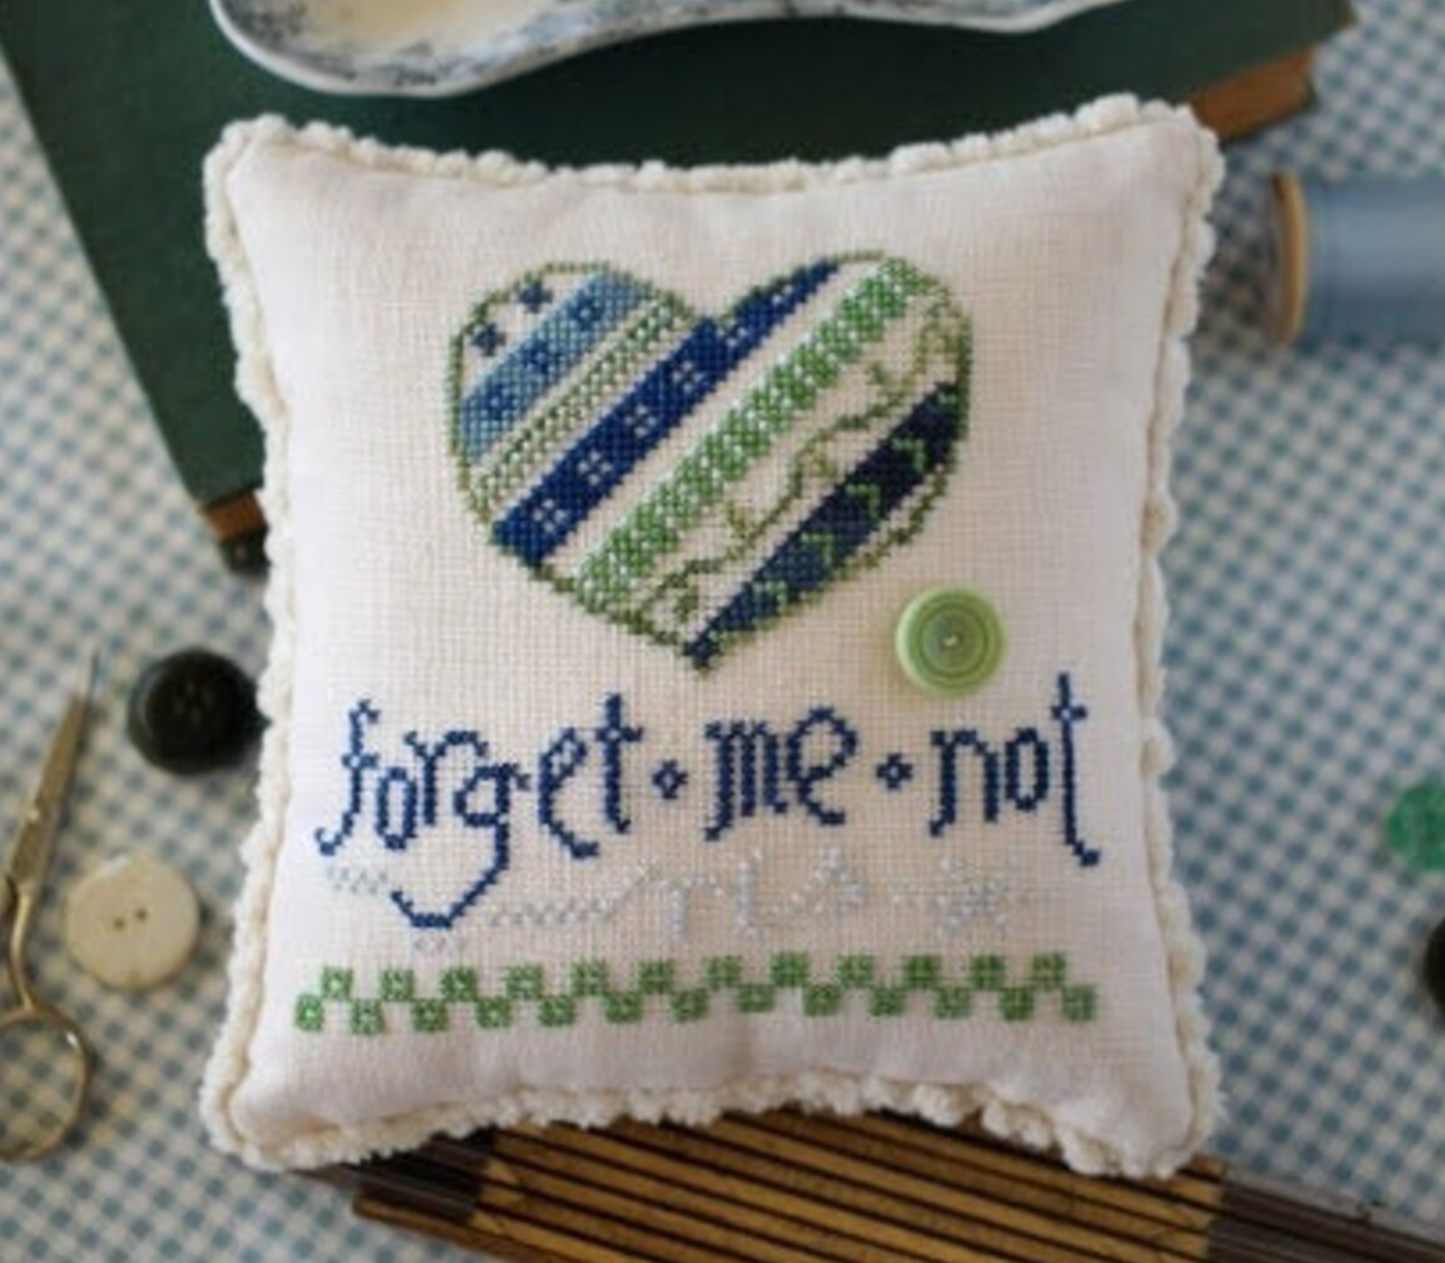 Forget Me Not by October House Fiber Arts